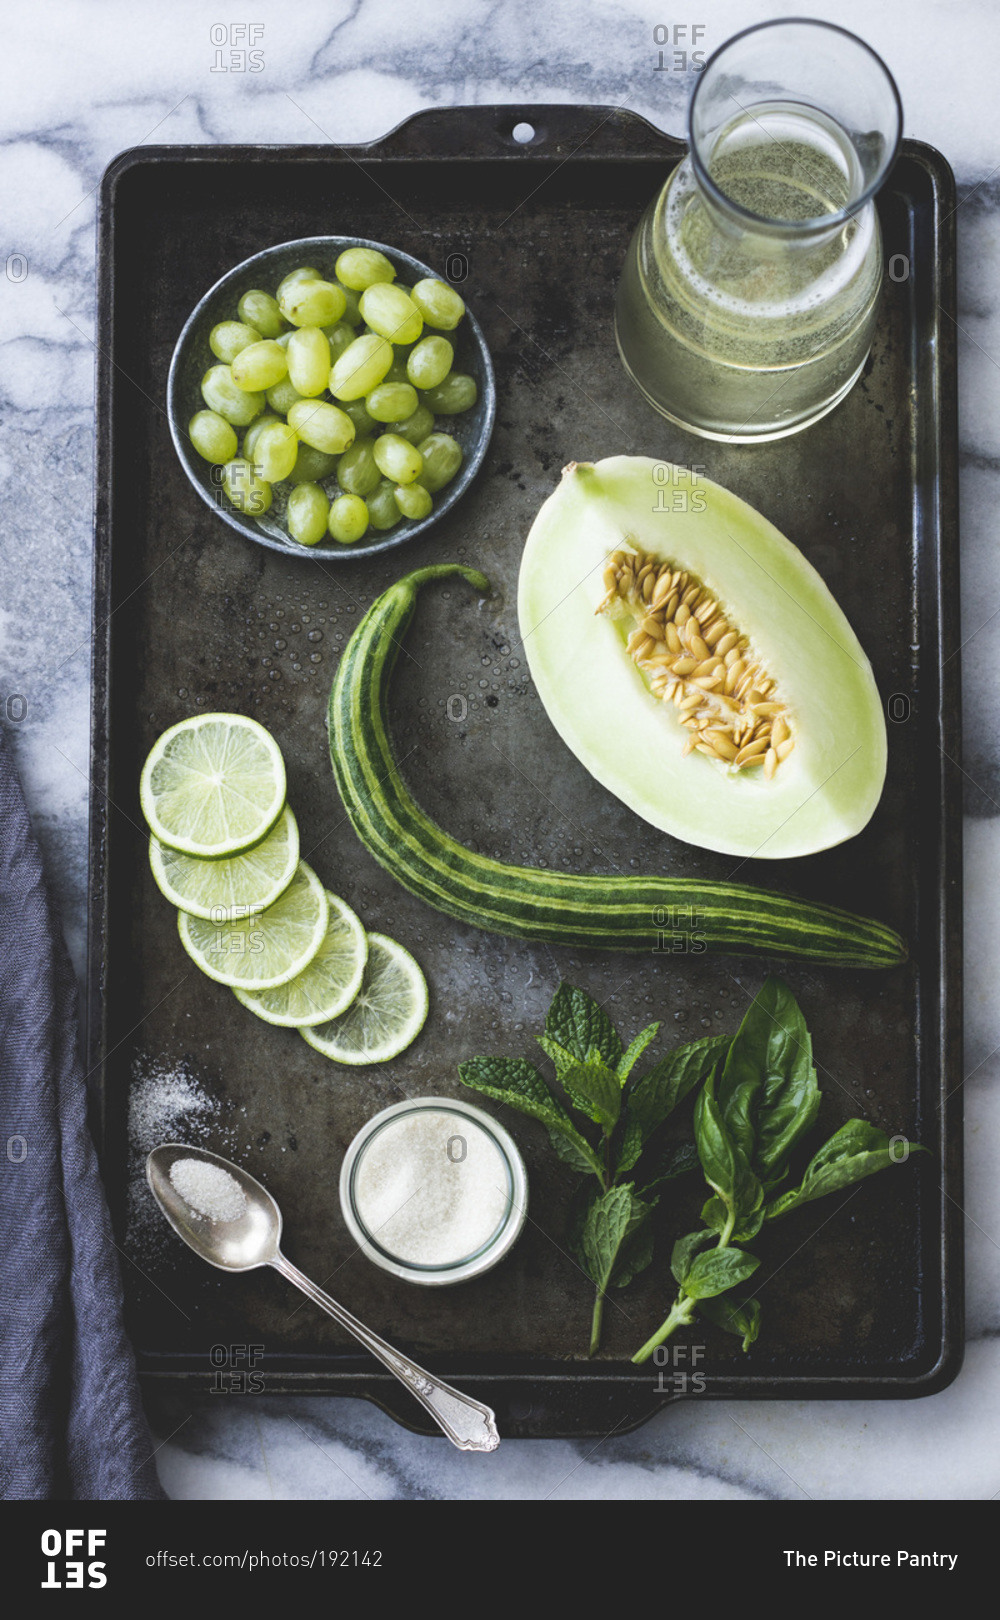 Green fruits and vegetables on a baking tray